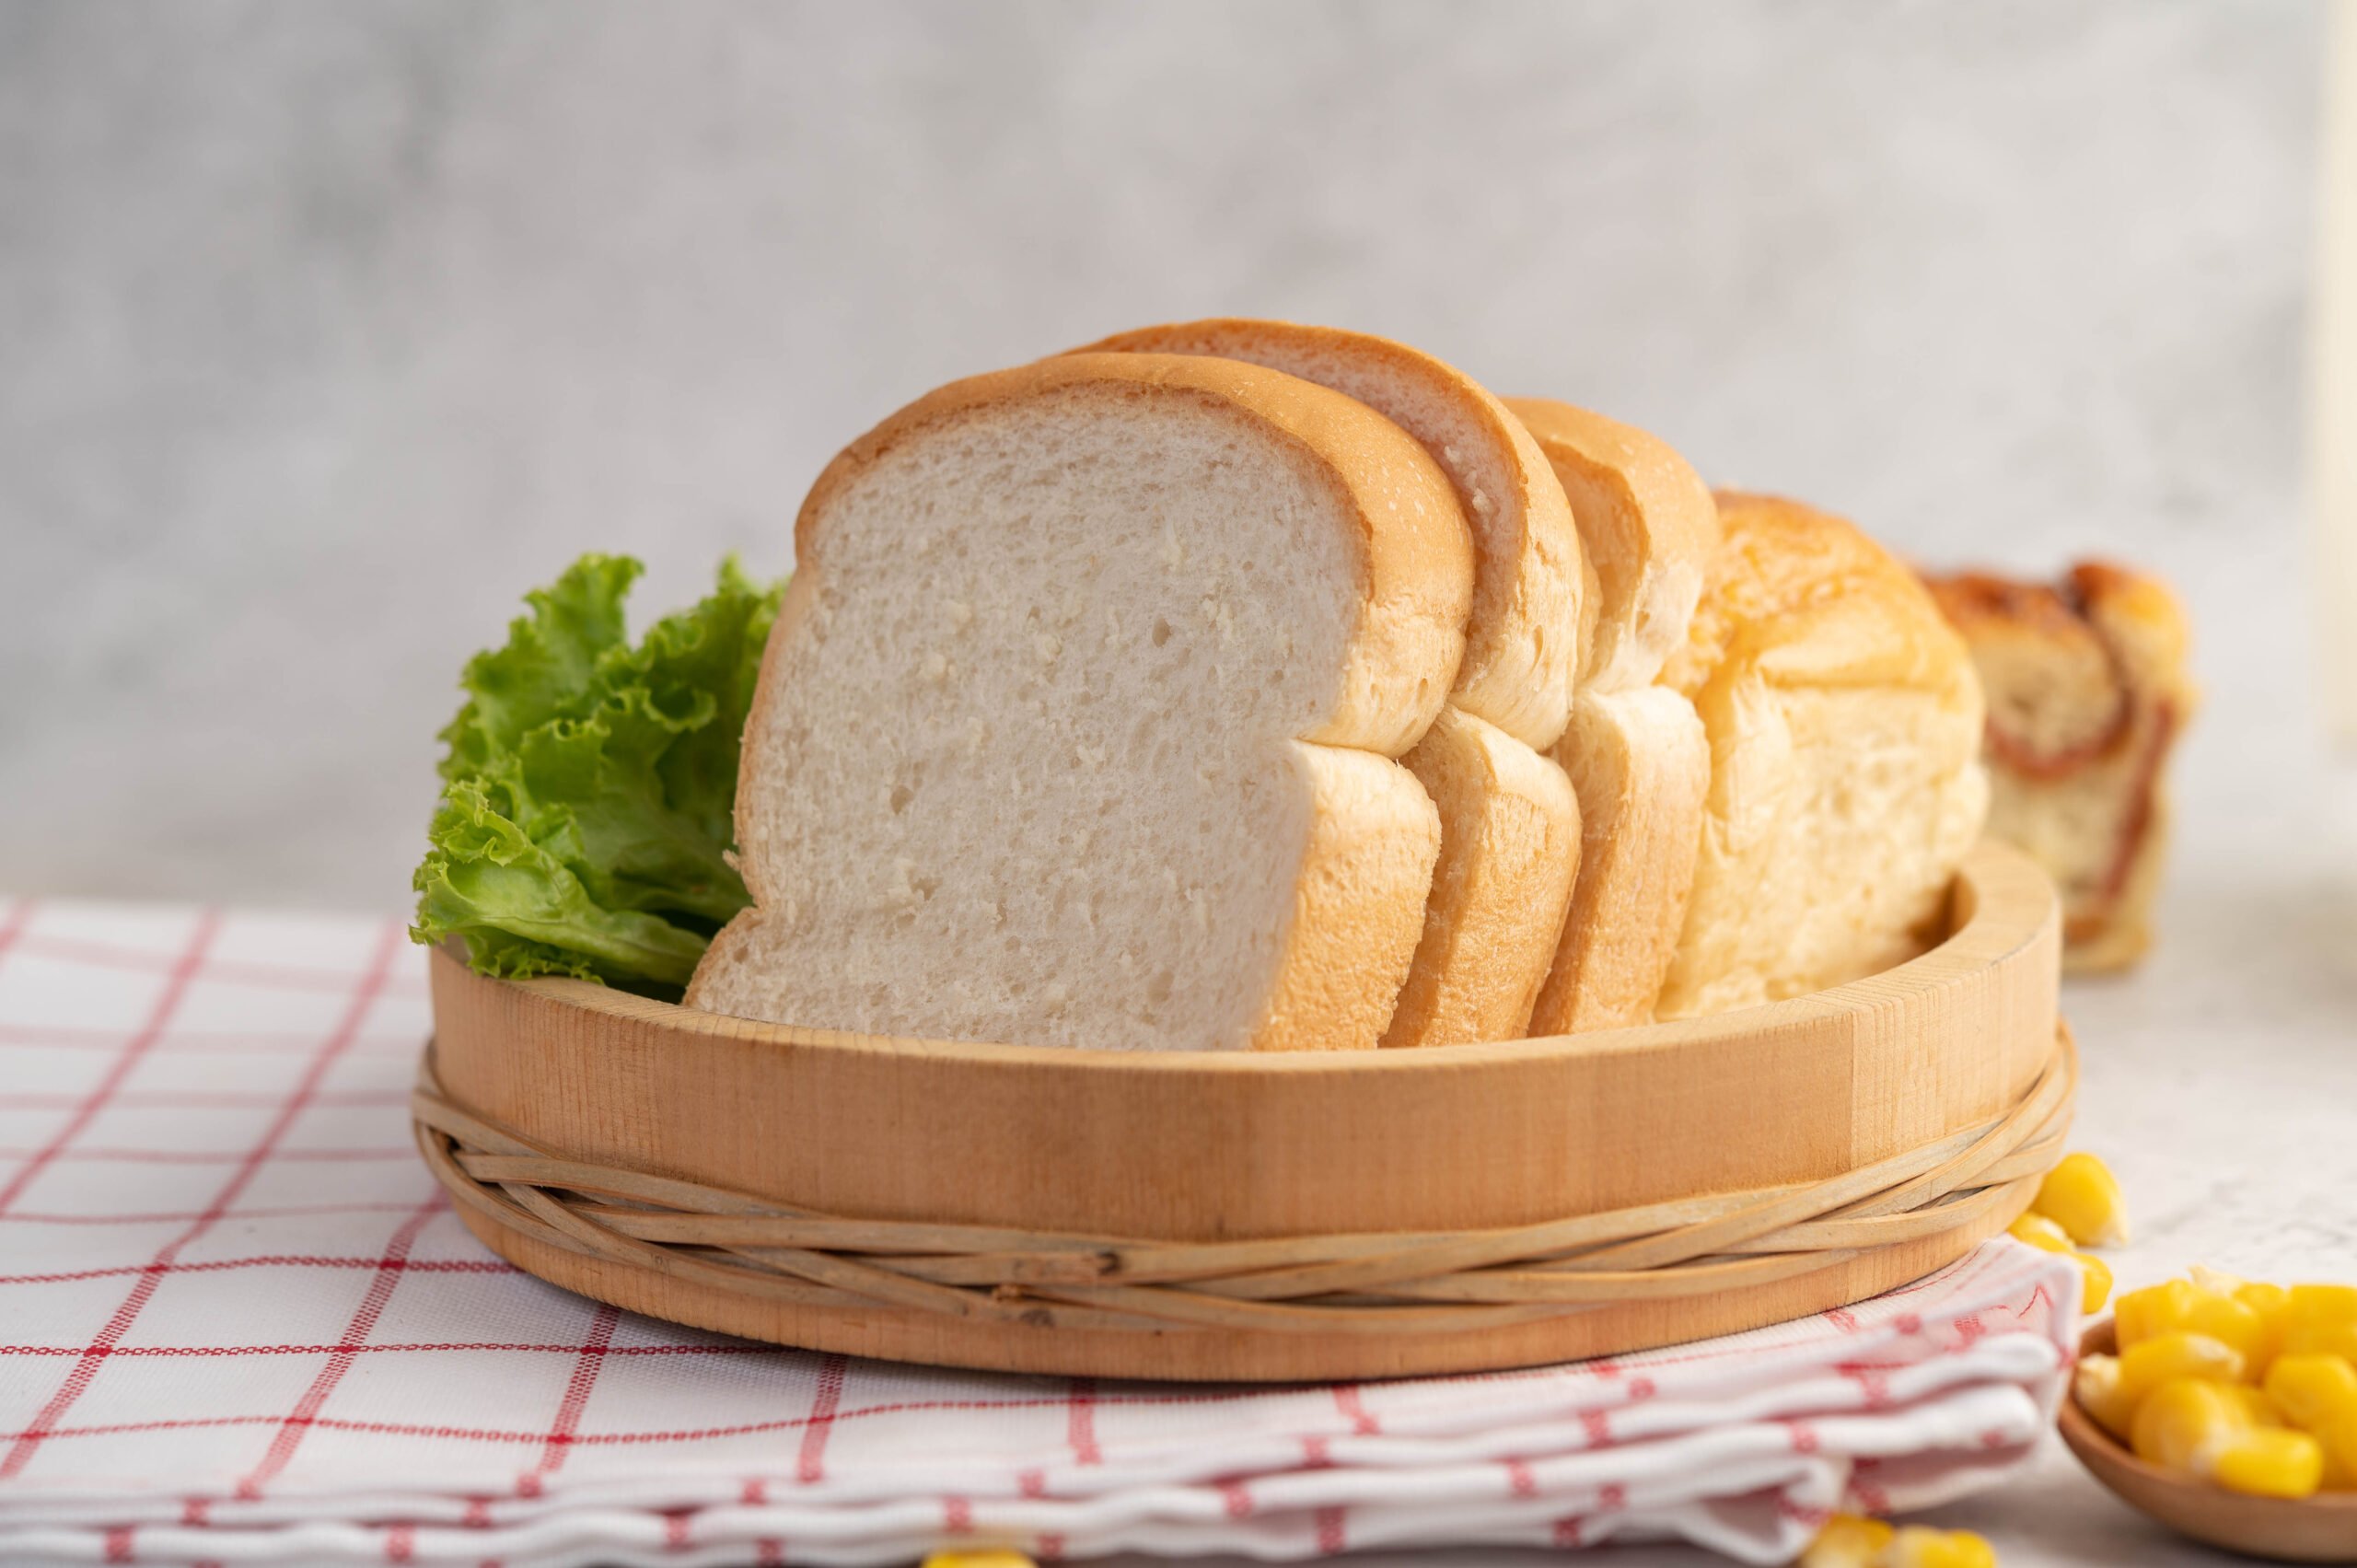 10 Side Effects Of Eating Too Much Bread